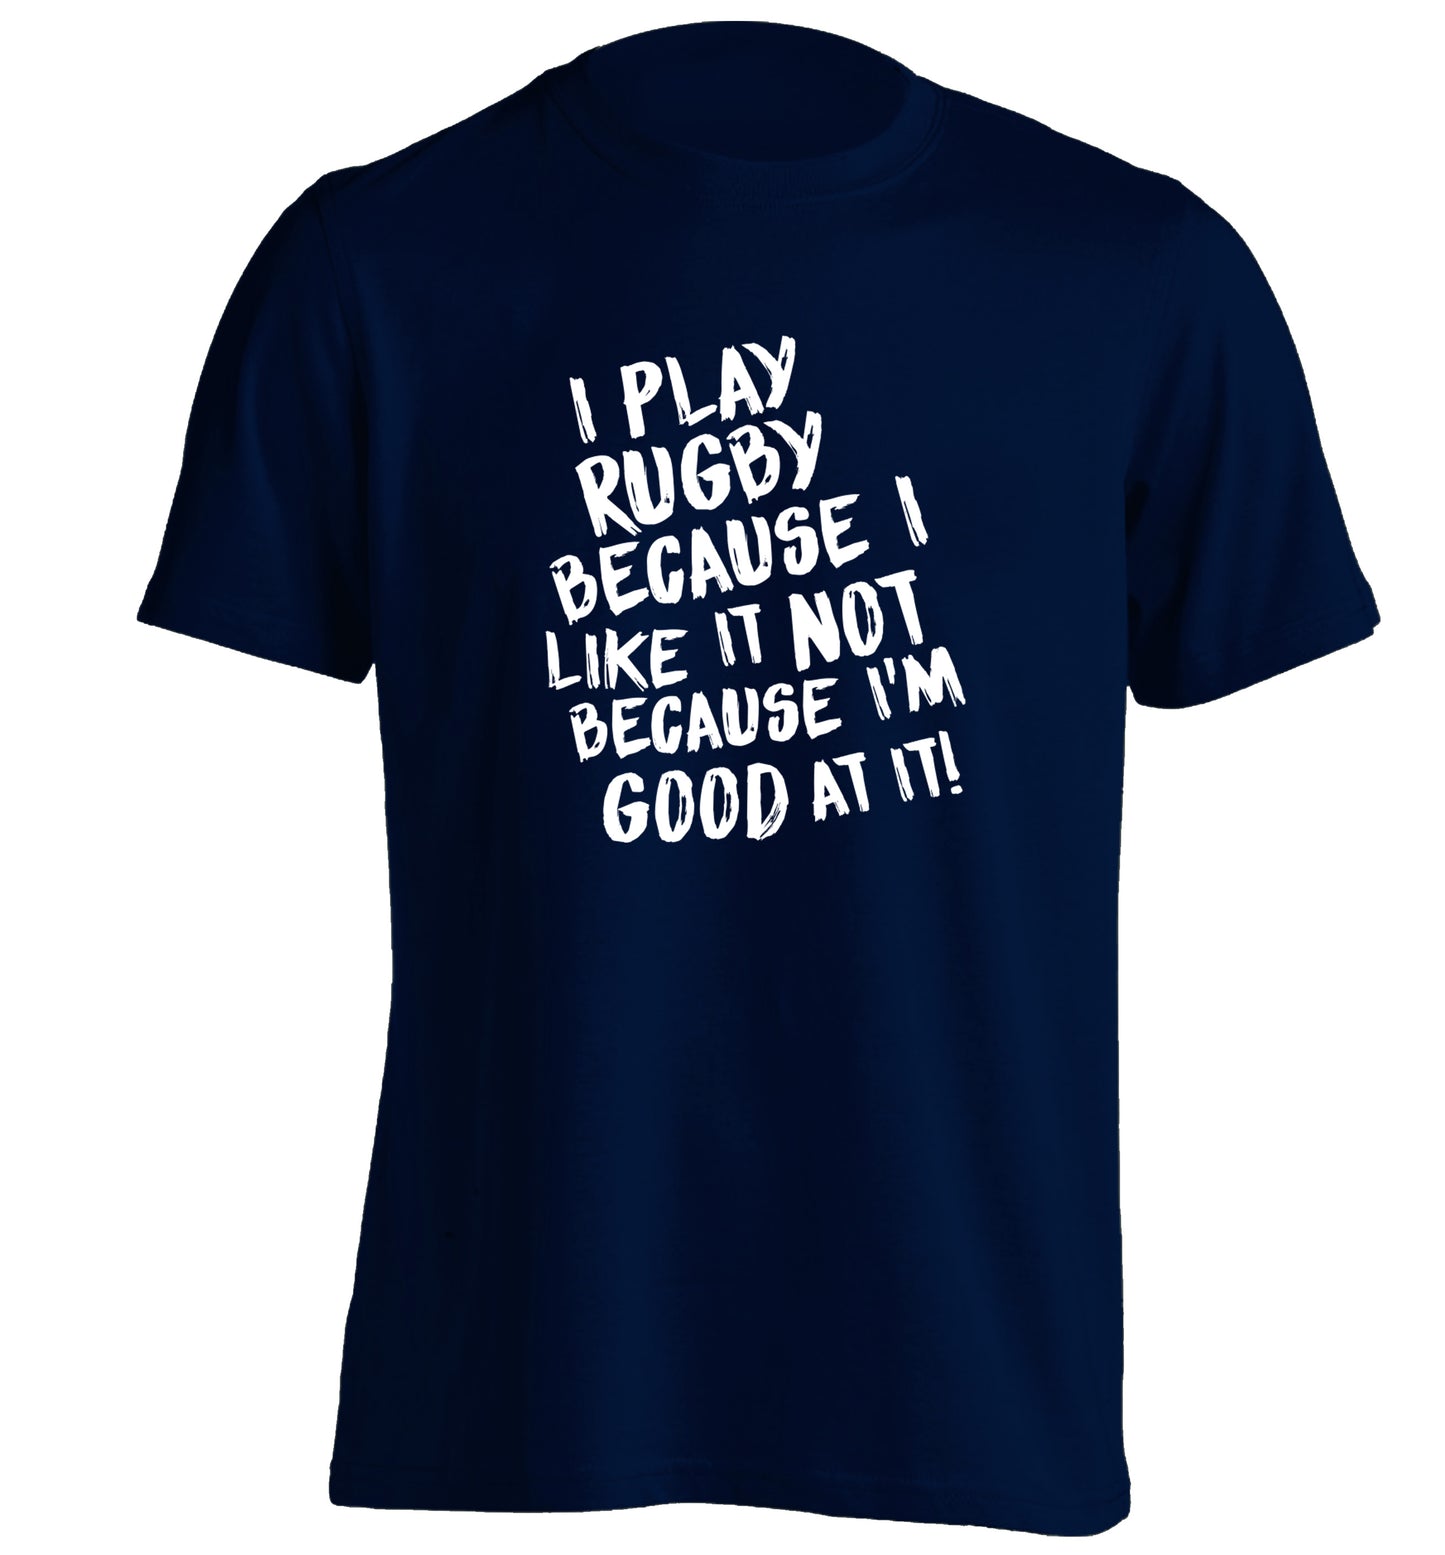 I play rugby because I like it not because I'm good at it adults unisex navy Tshirt 2XL